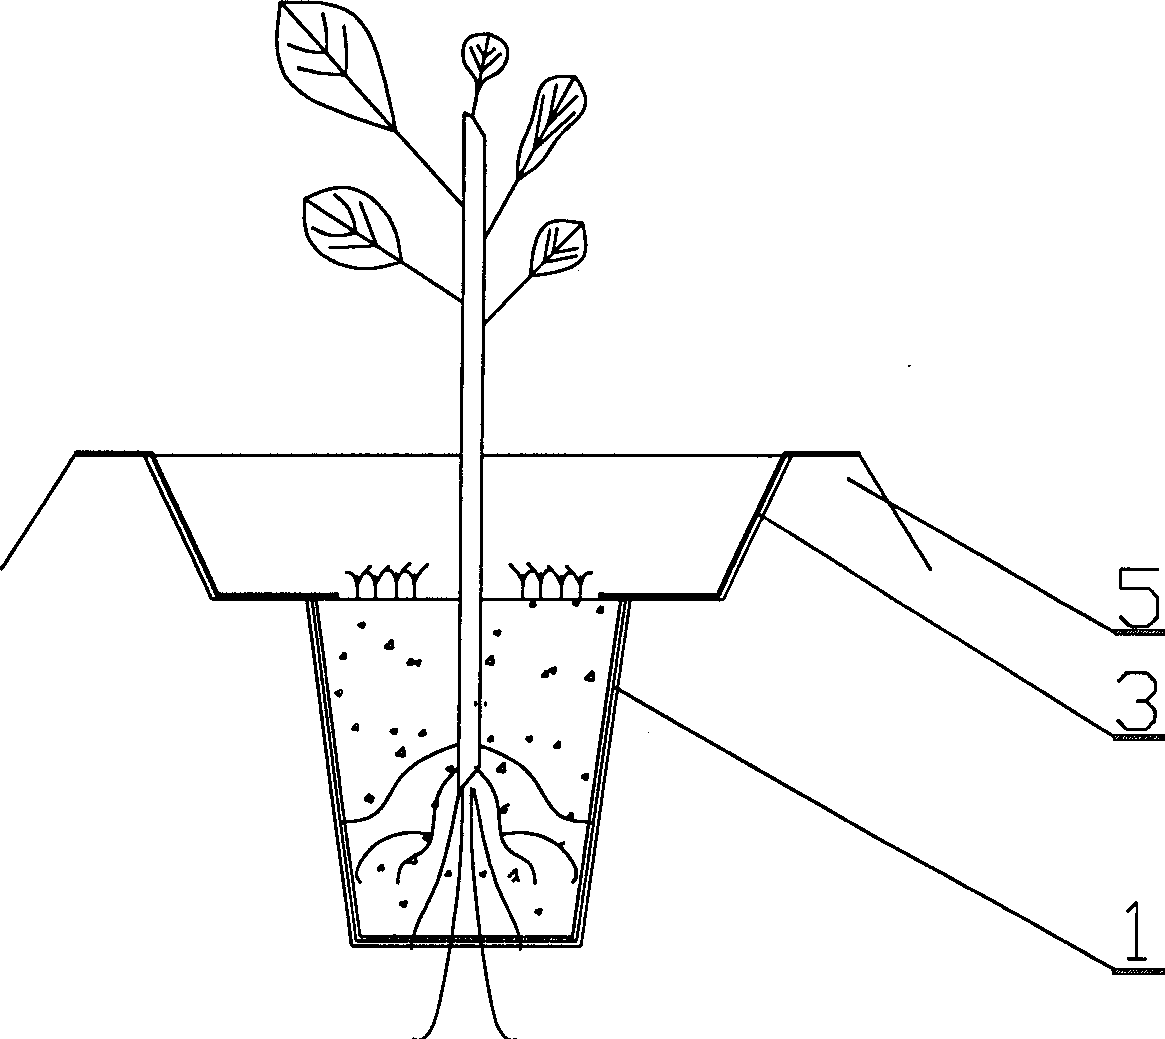 Planting method and irrigation apparatus for drought and hot climate zone